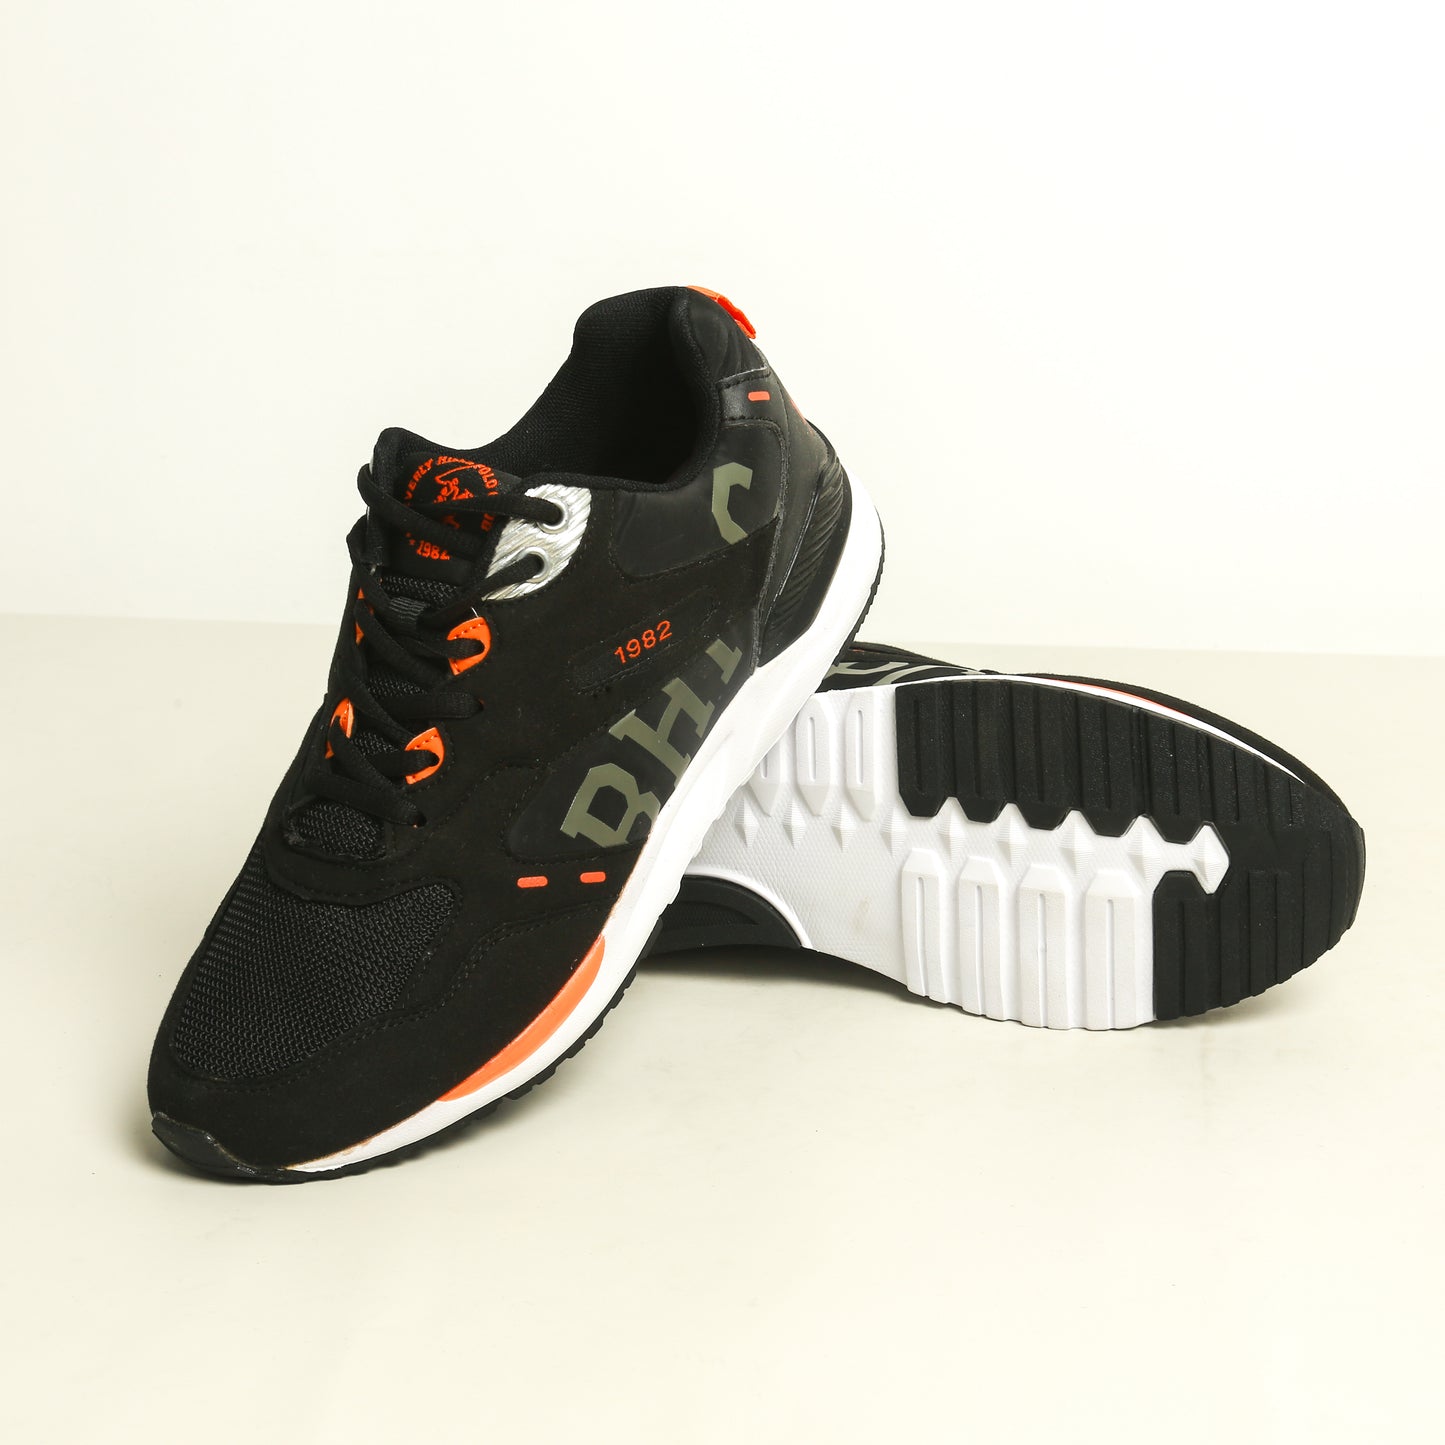 Sneakers Bevely Hills Polo Club - Noir